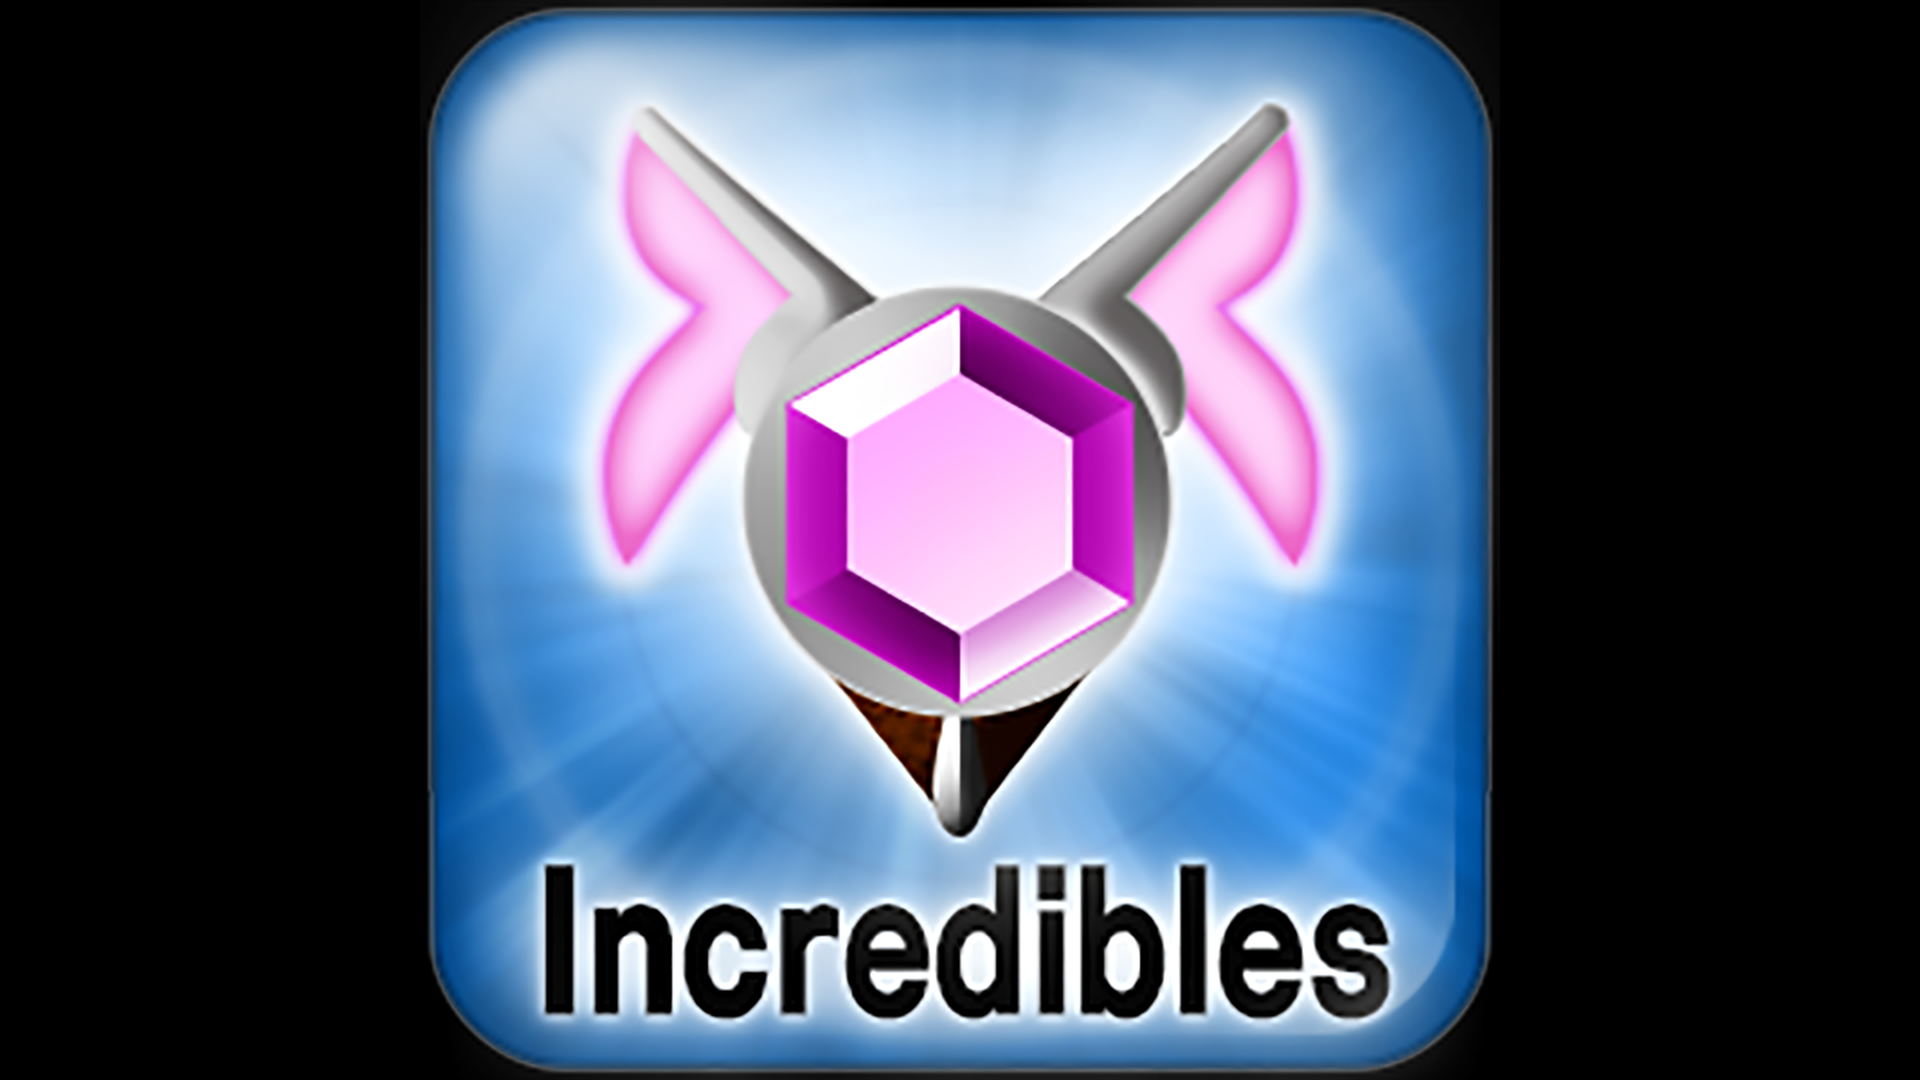 Icon for "INCREDIBLE!"